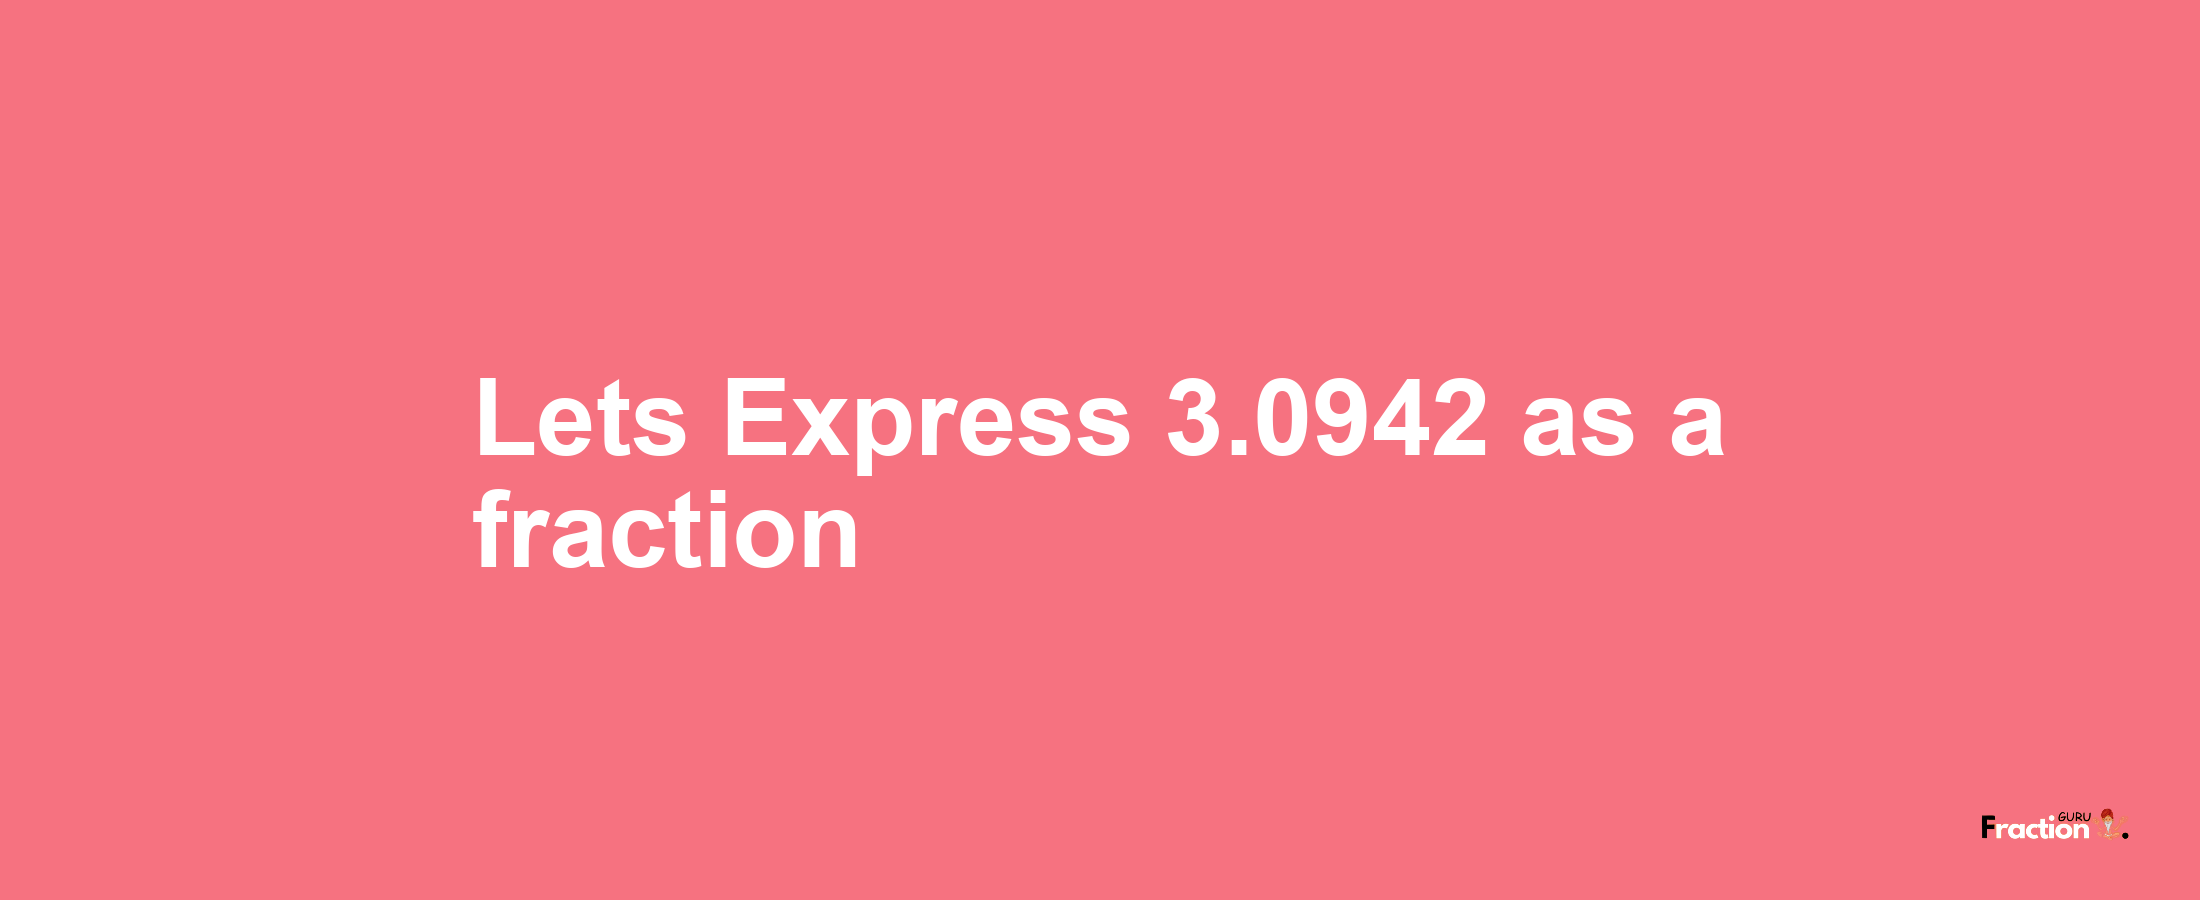 Lets Express 3.0942 as afraction